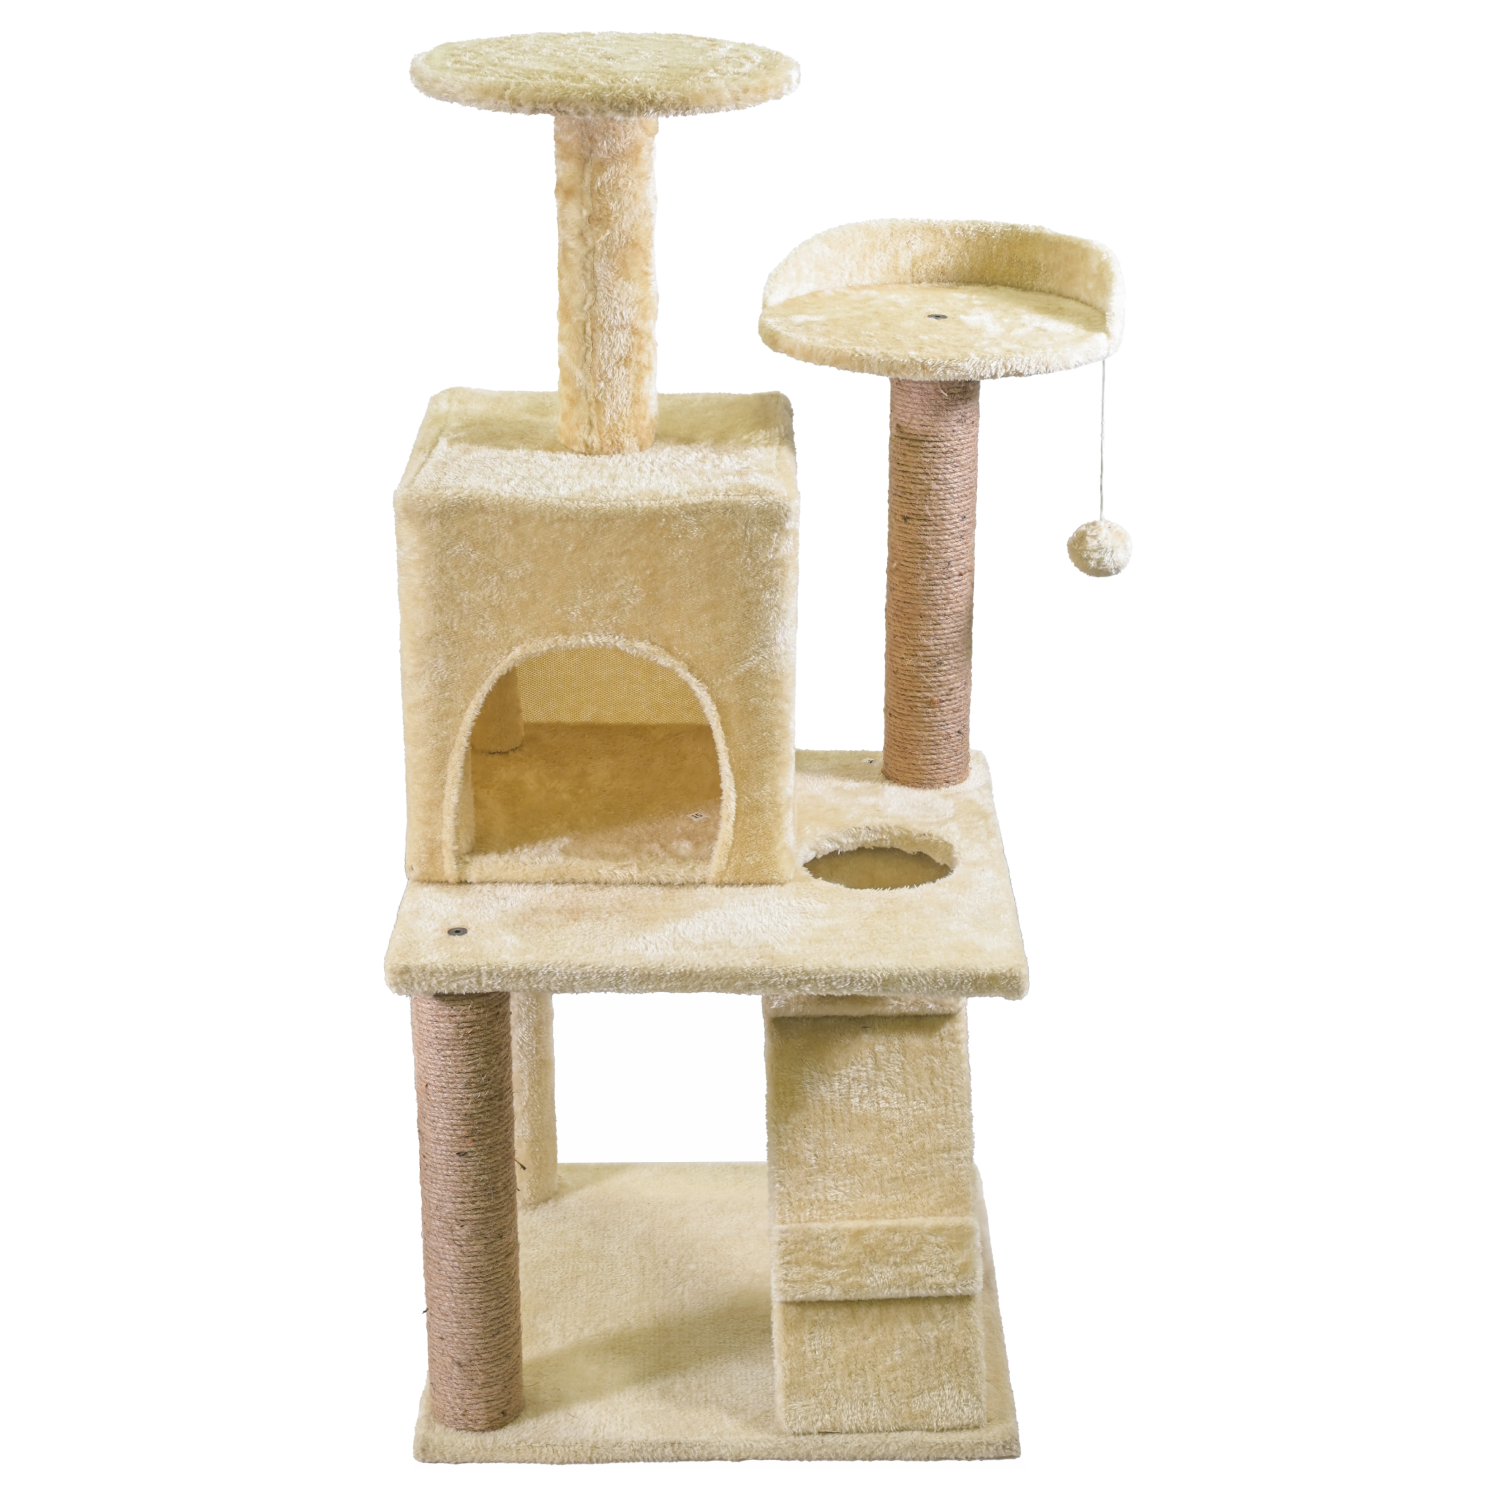 SKATRS Kitty Kastle Multi Level Cat Tree with Condo, Scratching Post, Platform and Ladder Toy (Beige)